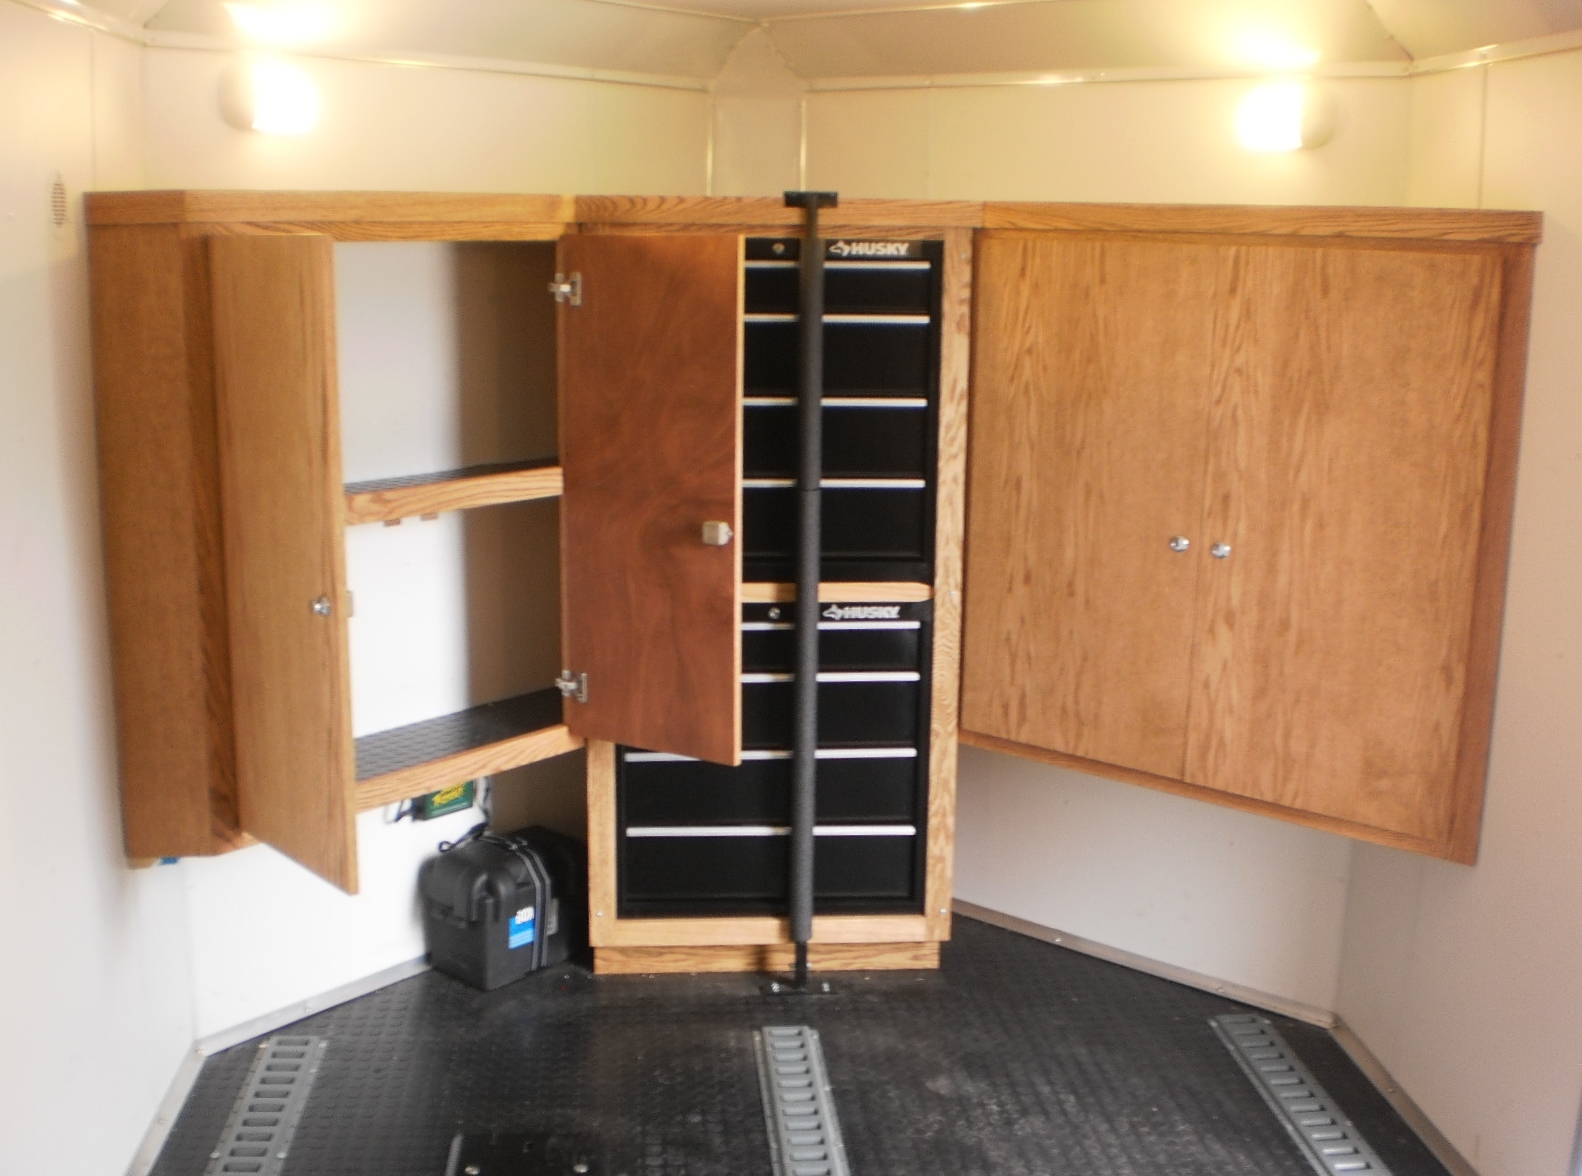 Carriages Enclosed Trailer Cabinet Options